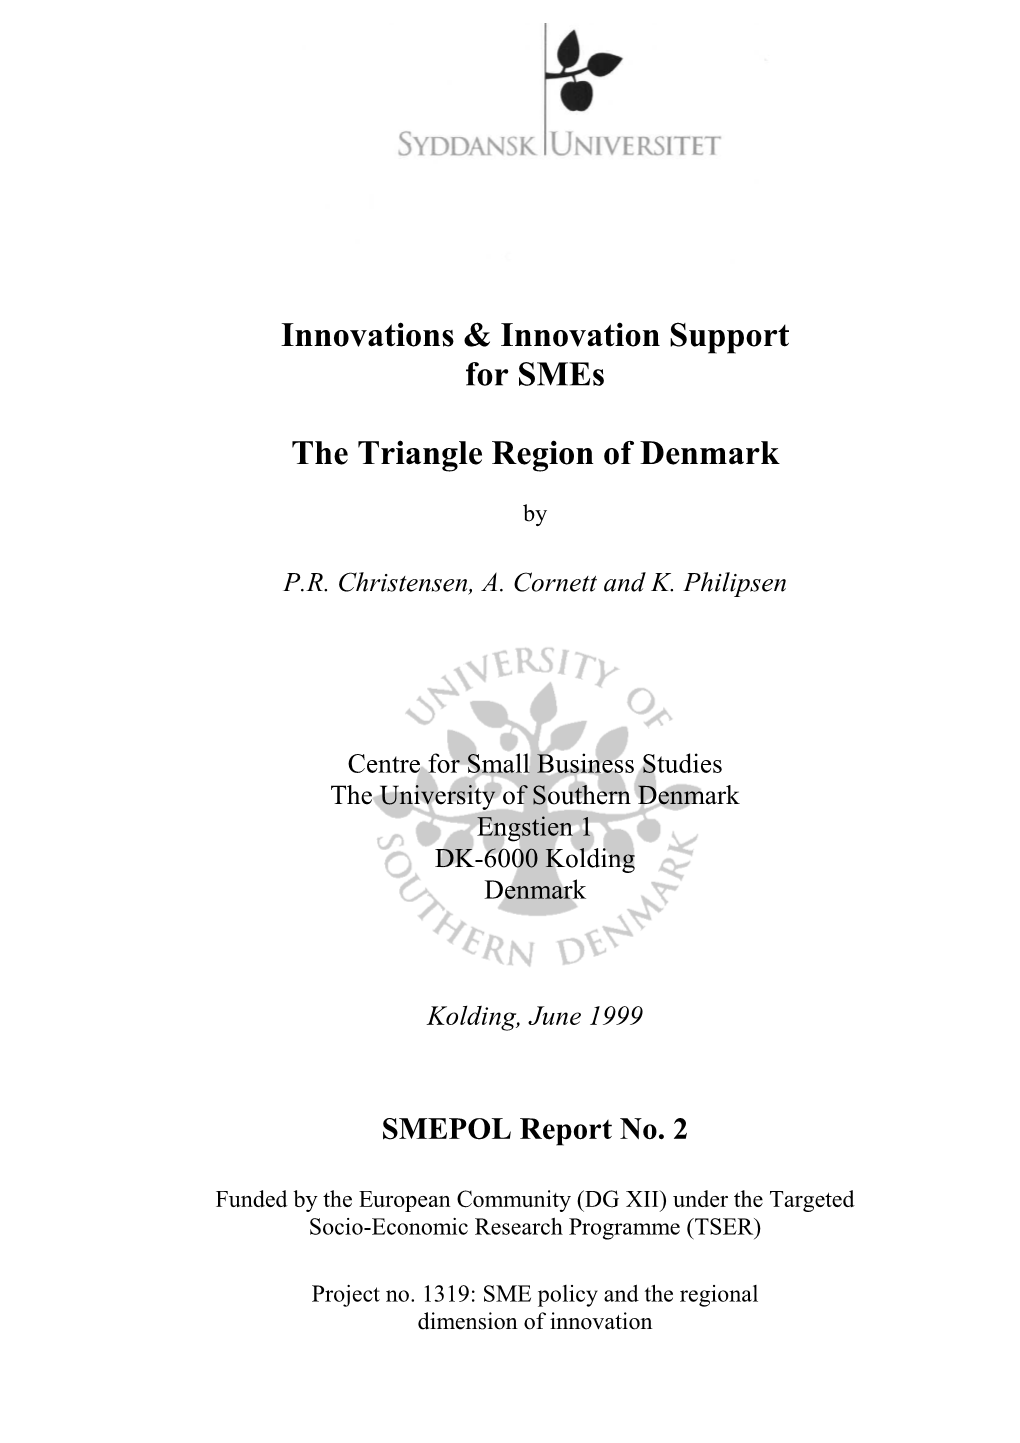 Innovations & Innovation Support for Smes the Triangle Region Of